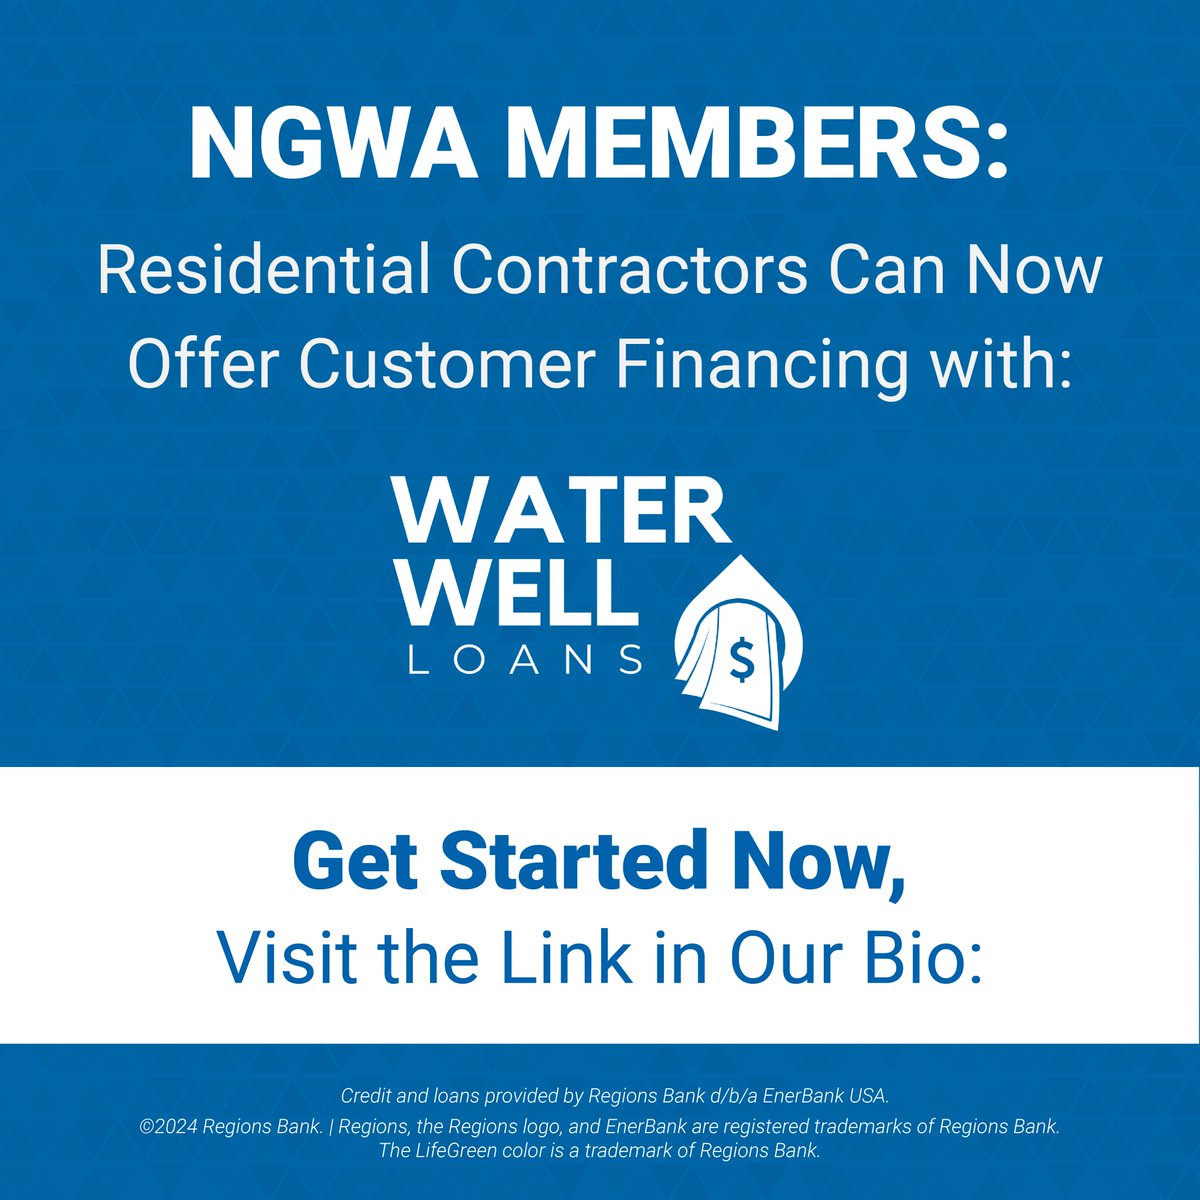 ENROLL IN WATER WELL LOANS NOW! National Ground Water Association is excited to announce the launch of Water Well Loans, powered by Regions | EnerBank USA. This new program is designed for our national members who are residential contractors. With Water Well Loans you can…